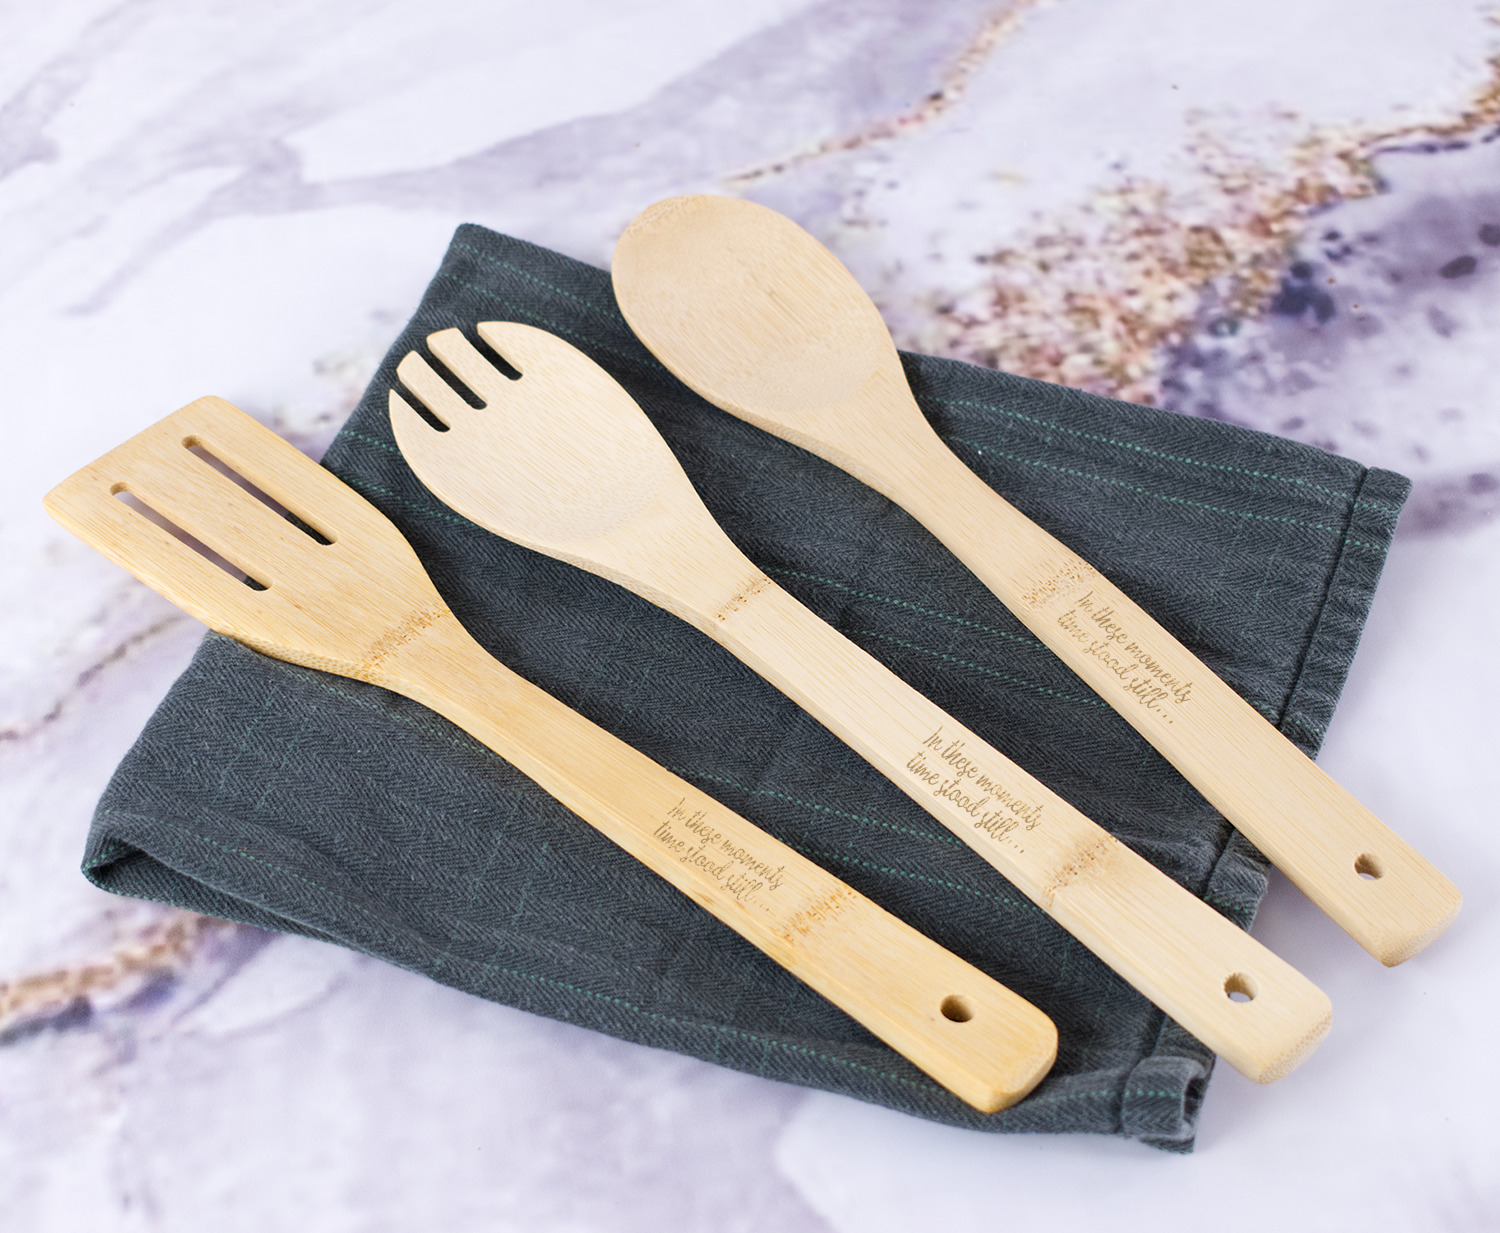 https://www.youcustomizeit.com/common/MAKE/1095102/Inspirational-Quotes-Bamboo-Cooking-Utensils-Set-In-Context.jpg?lm=1670086987